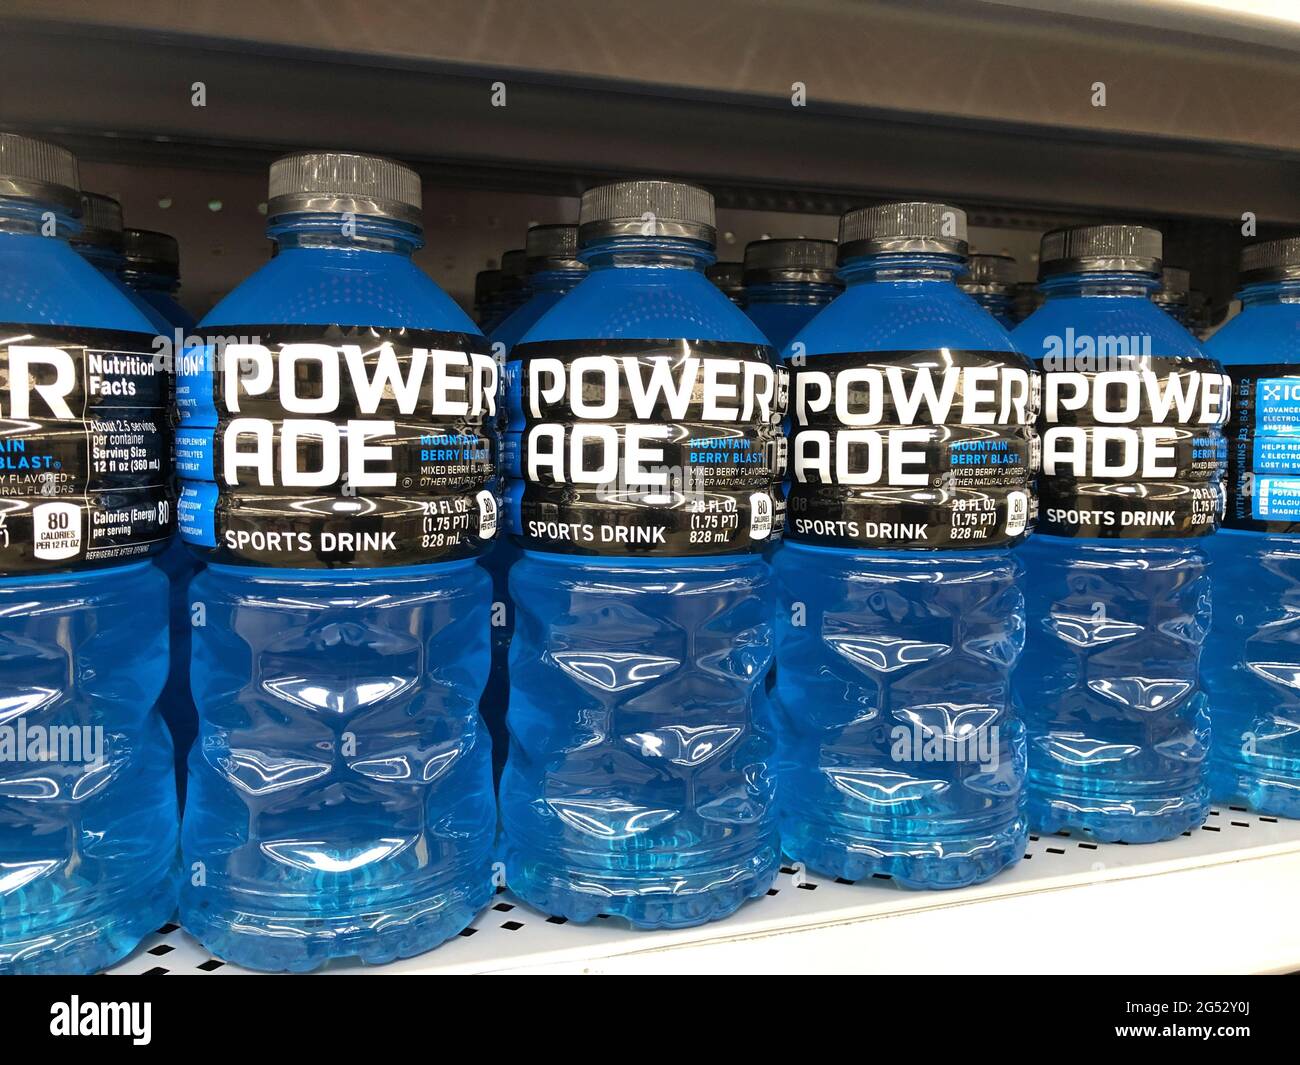 Indianapolis - Circa June 2021: Powerade sports drink display. Powerade replenishes vitamins and electrolytes lost during physical activities and is a Stock Photo